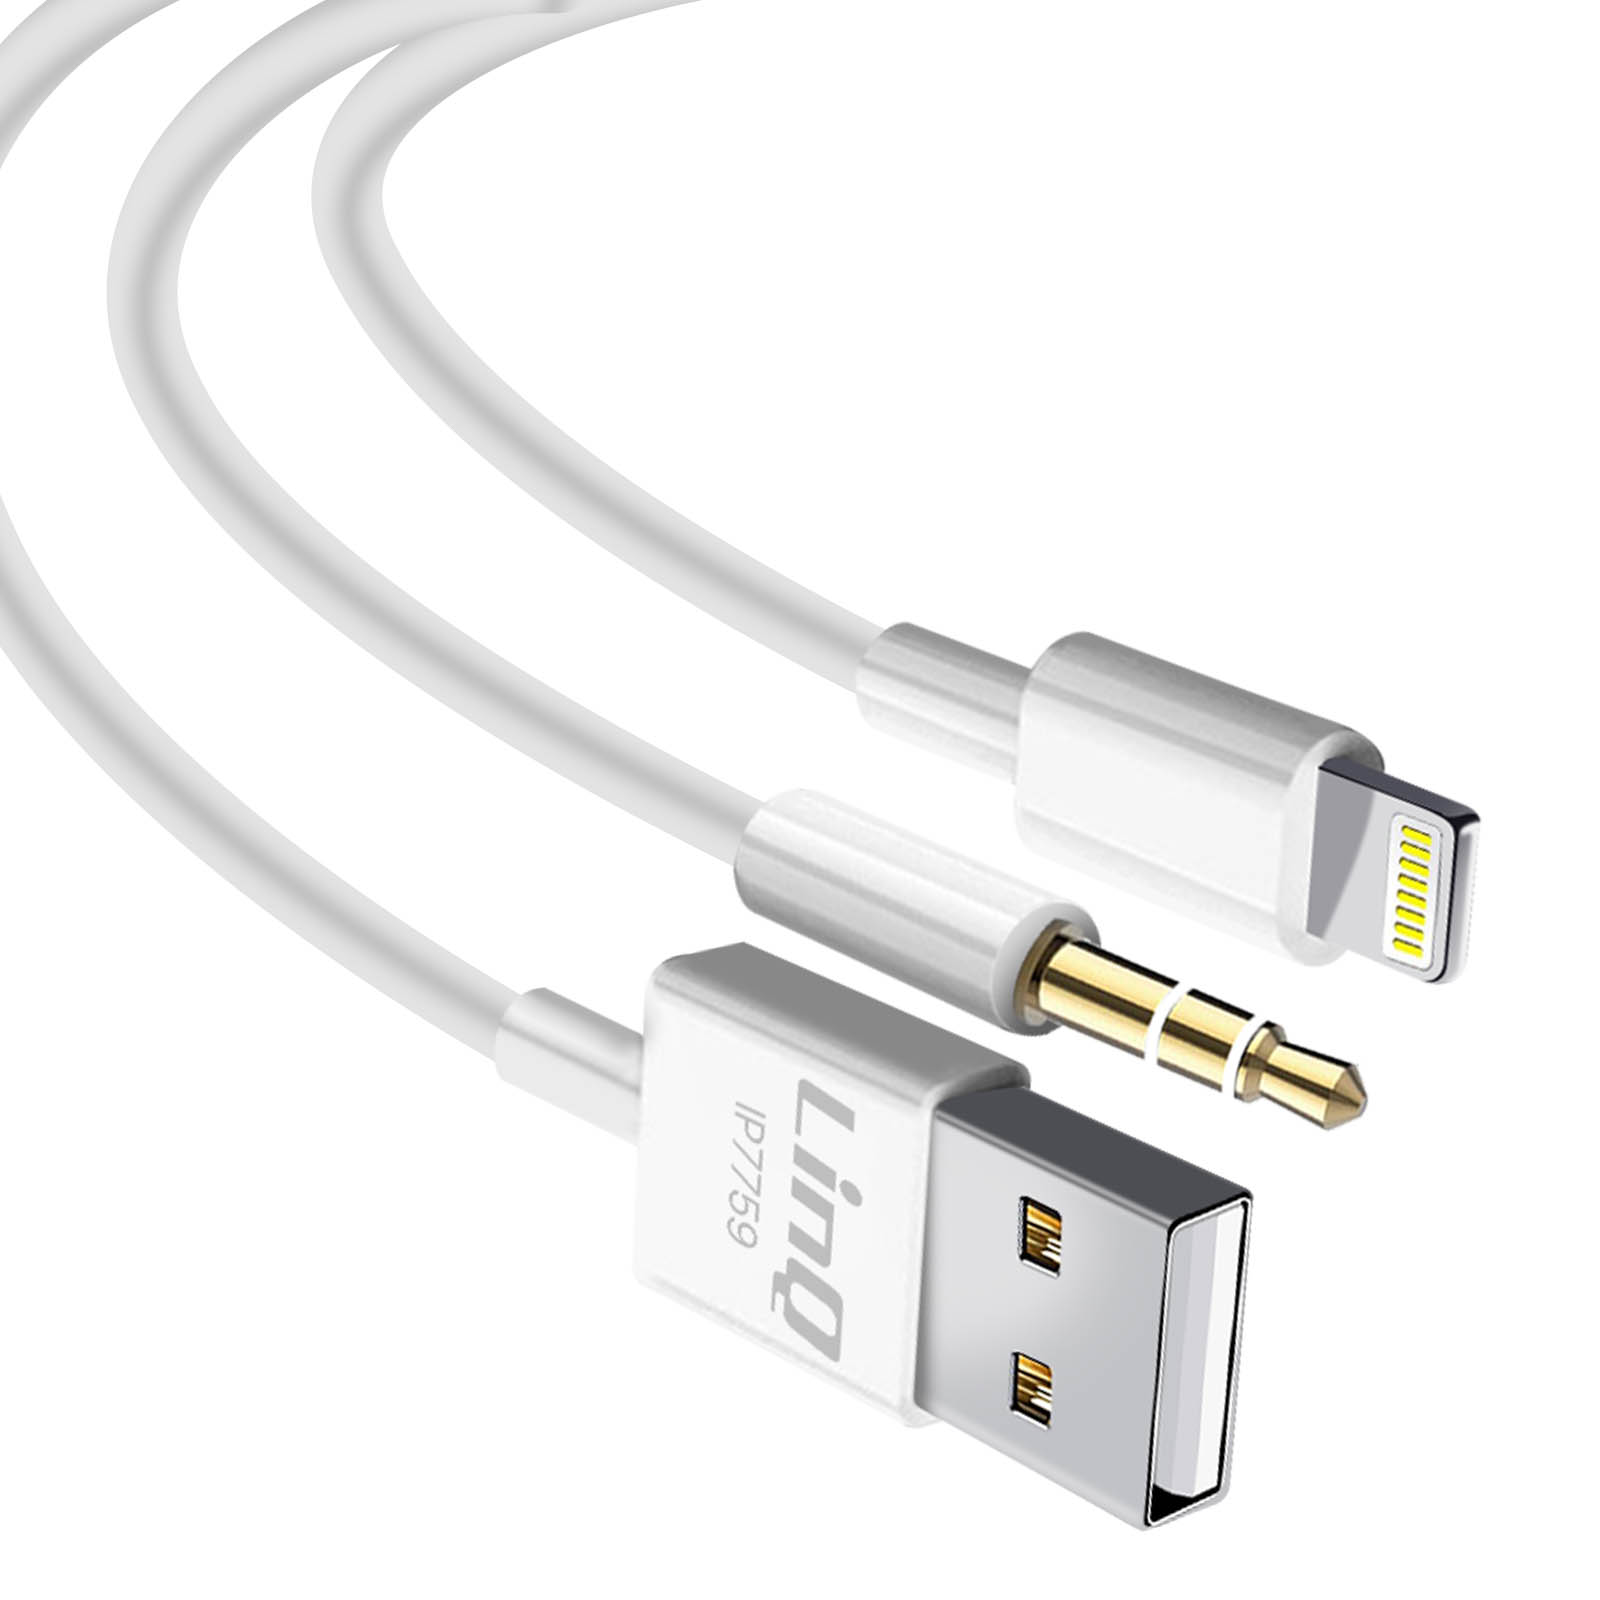 USB-Kabel LINQ 2-in-1 7759